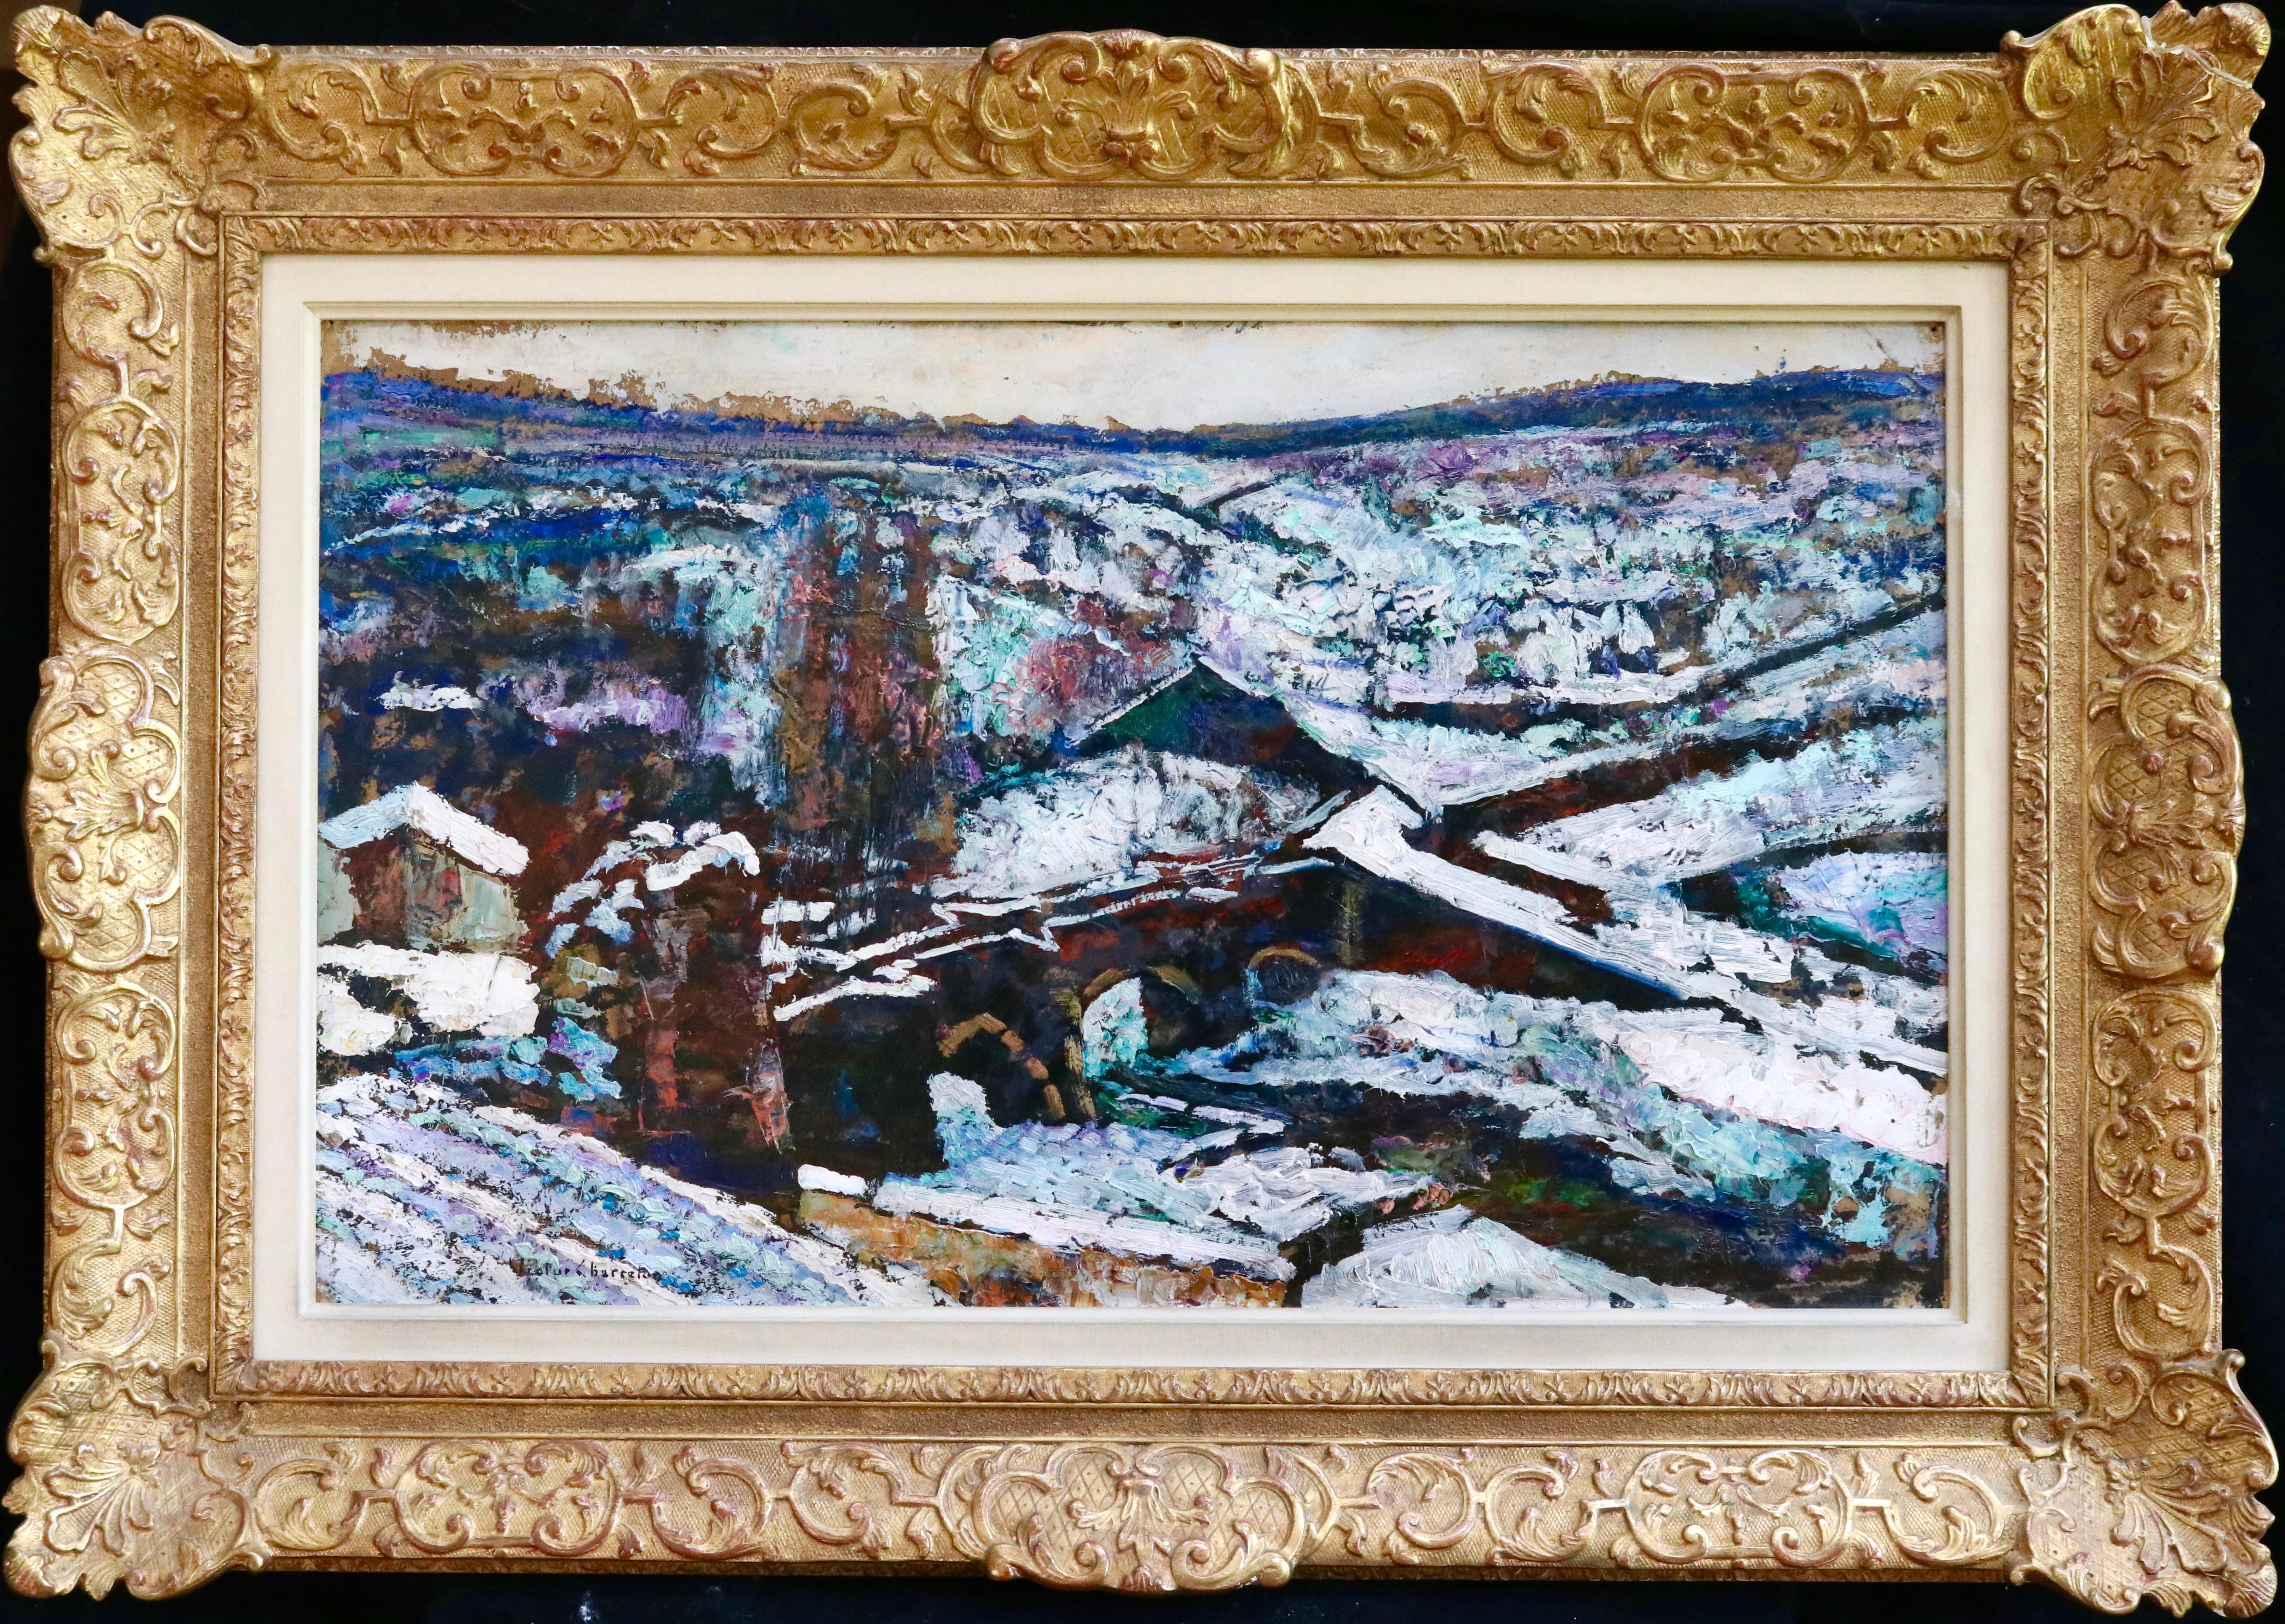 Oil on board by Victor Charreton depicting a bridge in a landscape under a blanket of snow. Signed lower left.

Charreton was a landscape artist in the Lyons tradition with a love of sensual impasto. In his works he seeks to capture fleeting,